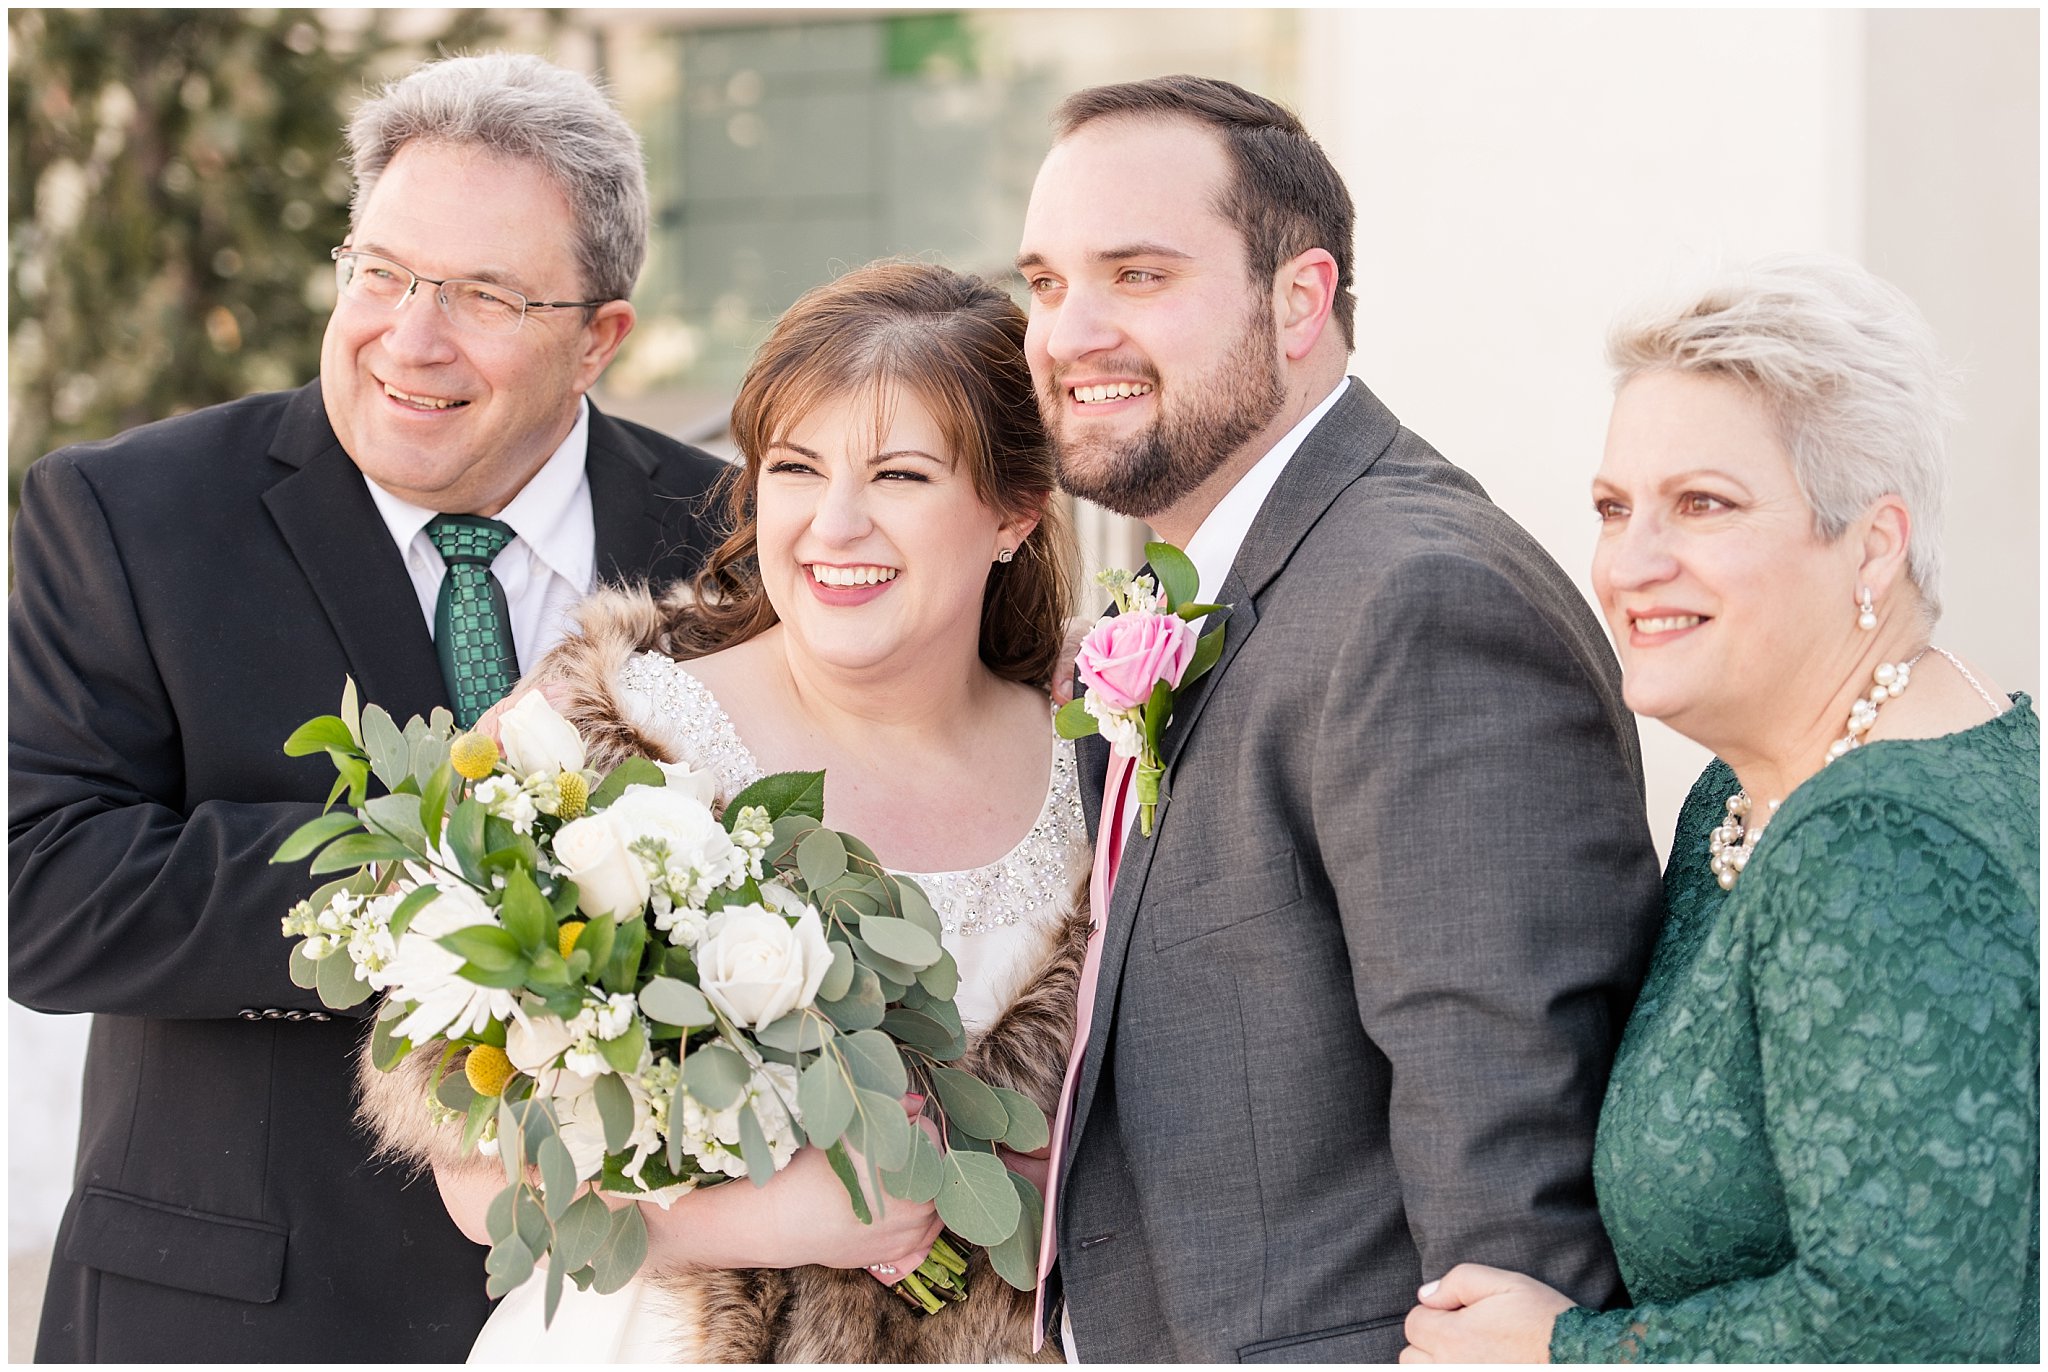 Bride groom and groom's parents | Ogden Temple Wedding | Jessie and Dallin Photography